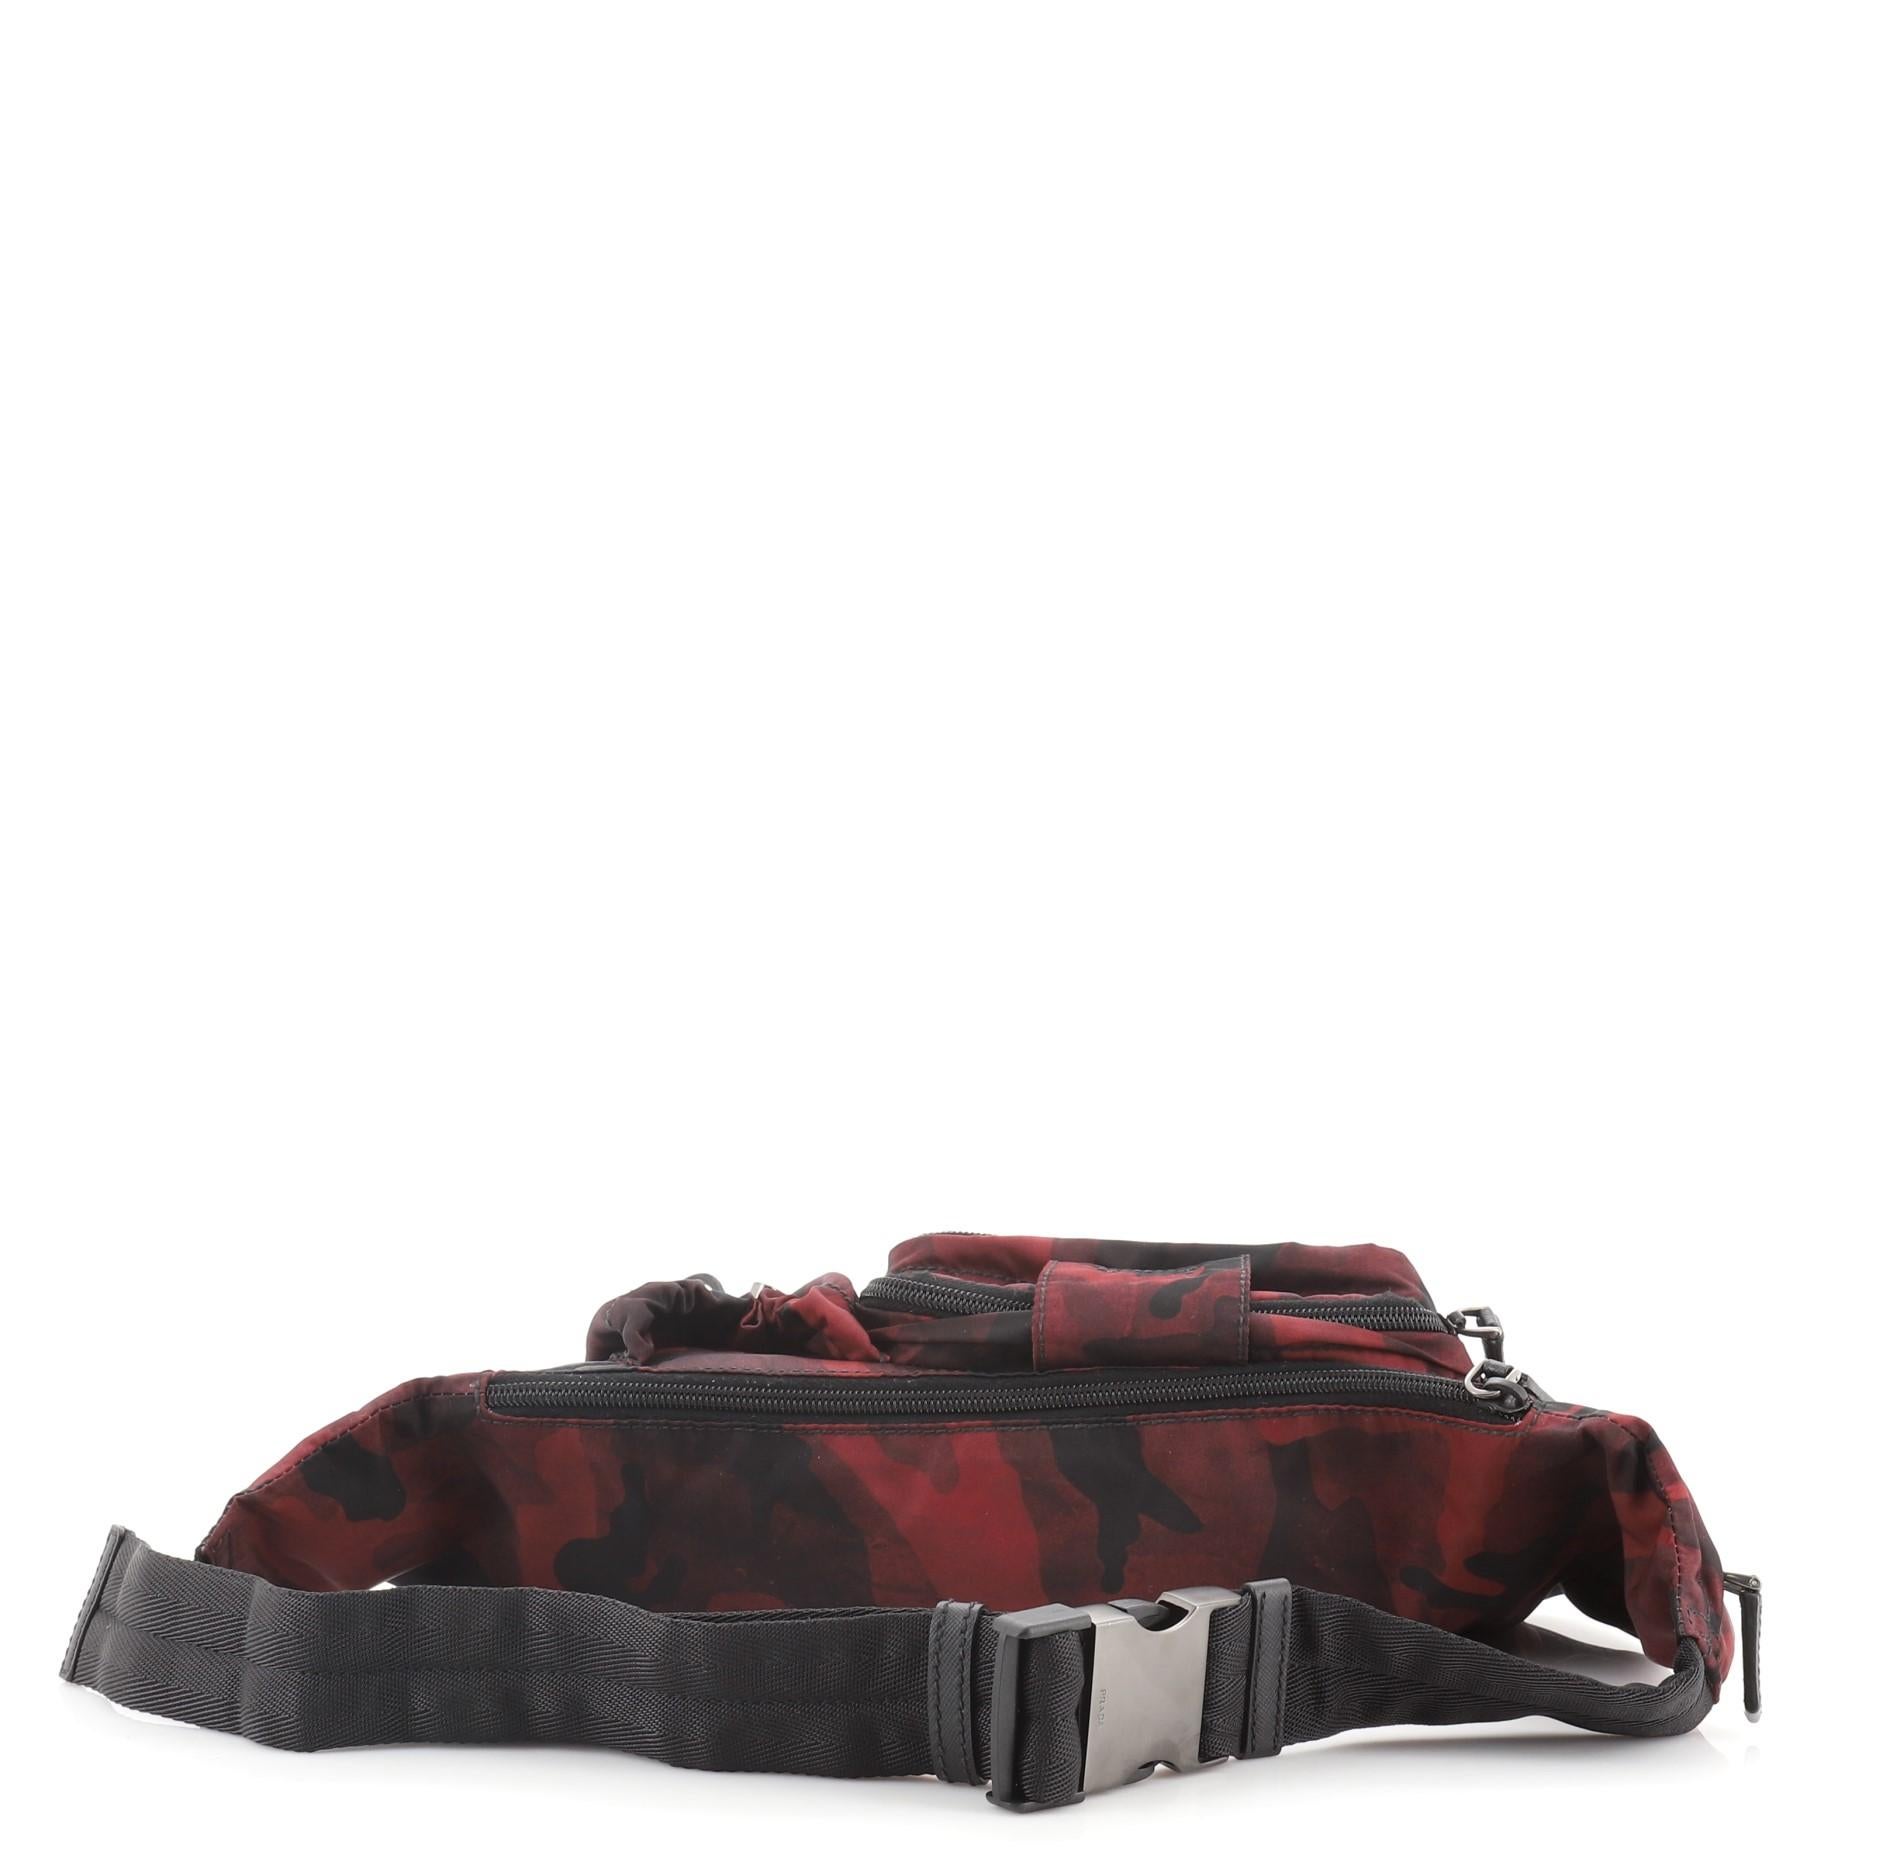 Prada Camo Waist Bag Tessuto
Black, Red

Condition Details: Minor wear on strap and openig corners, scratches on hardware.

52020MSC

Height 6